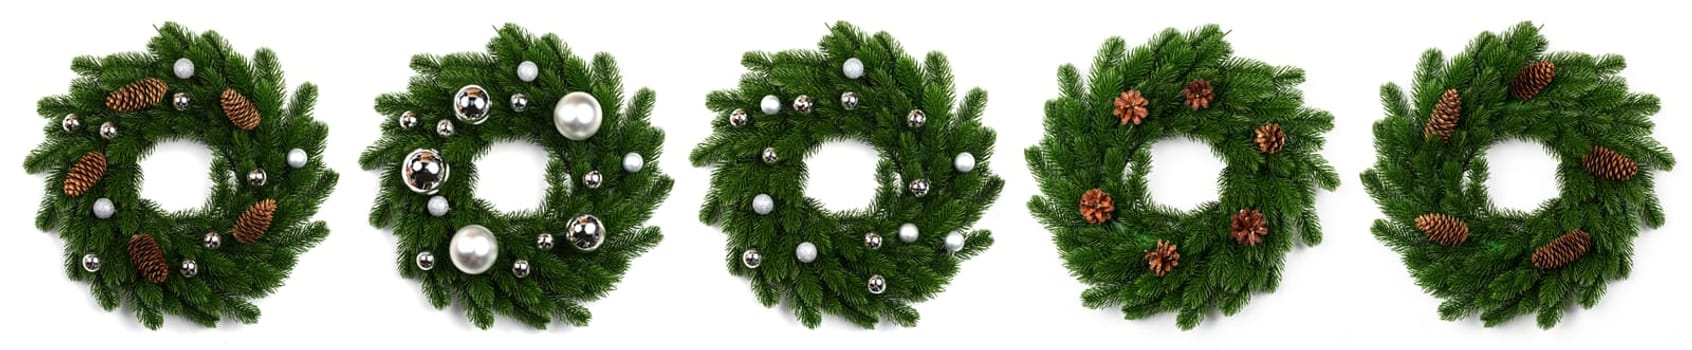 isolated christmas wreath and silver balls on white background